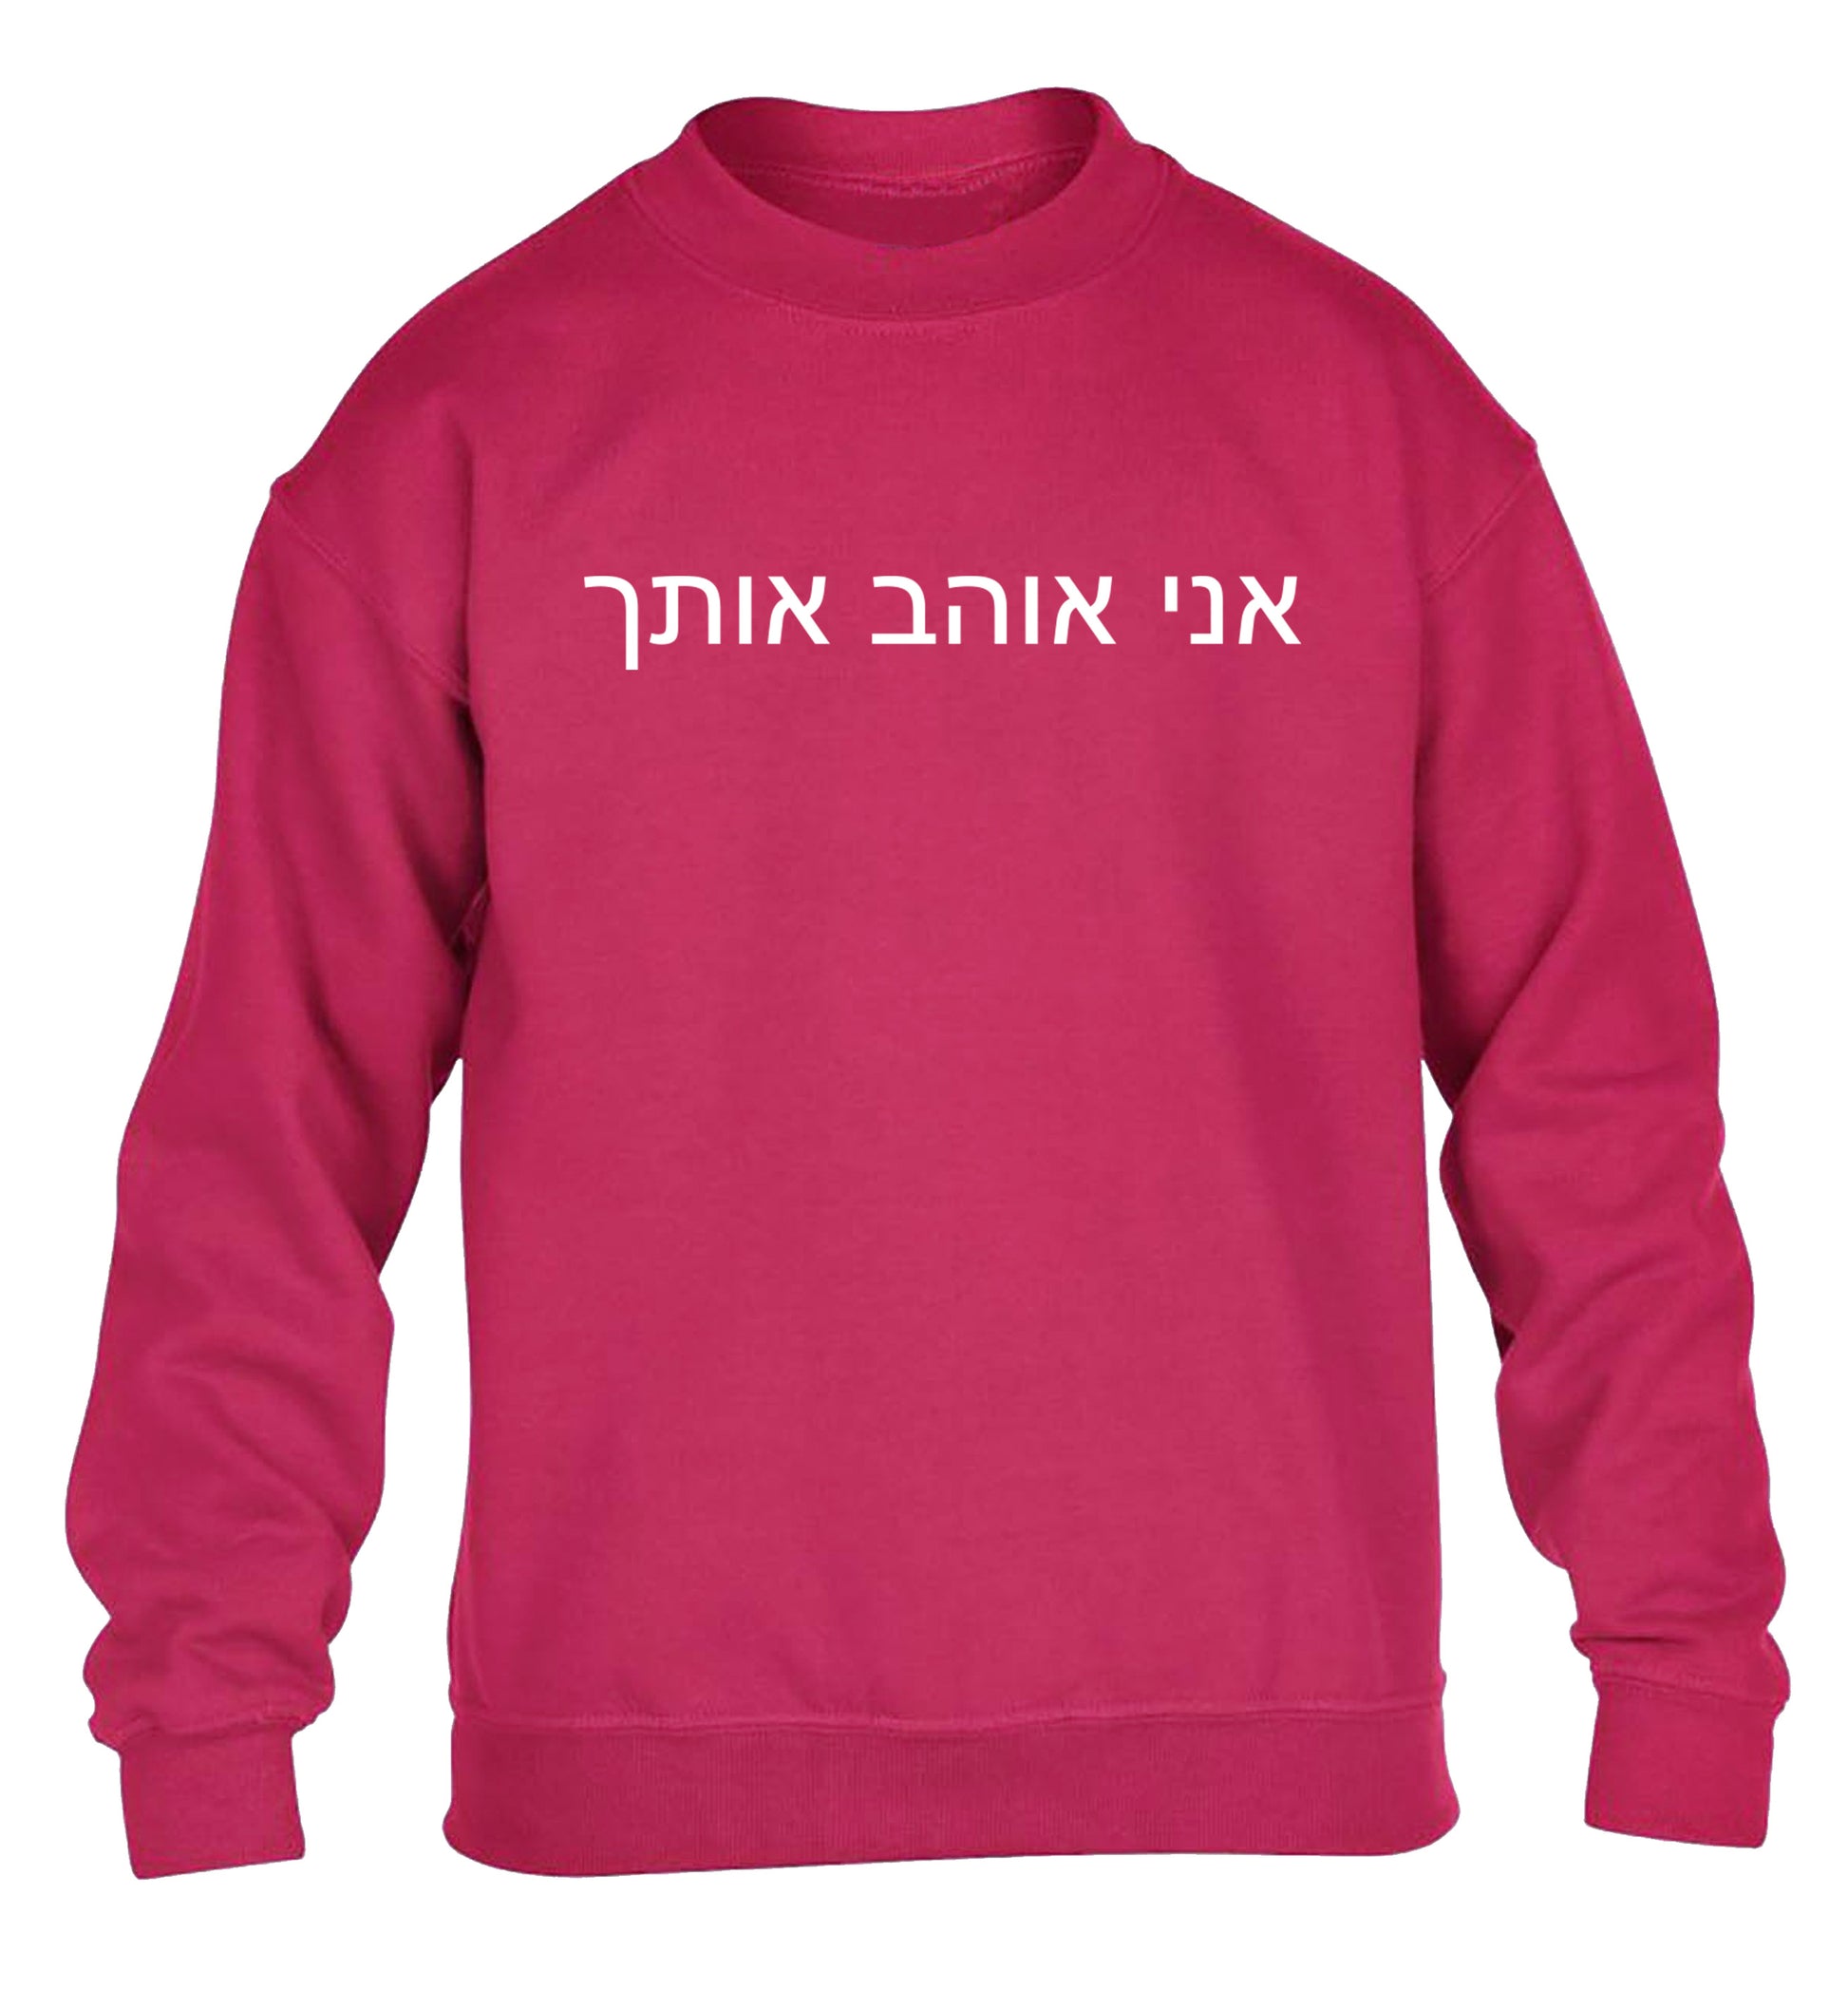 ___ ____ ____ - I love you children's pink sweater 12-13 Years